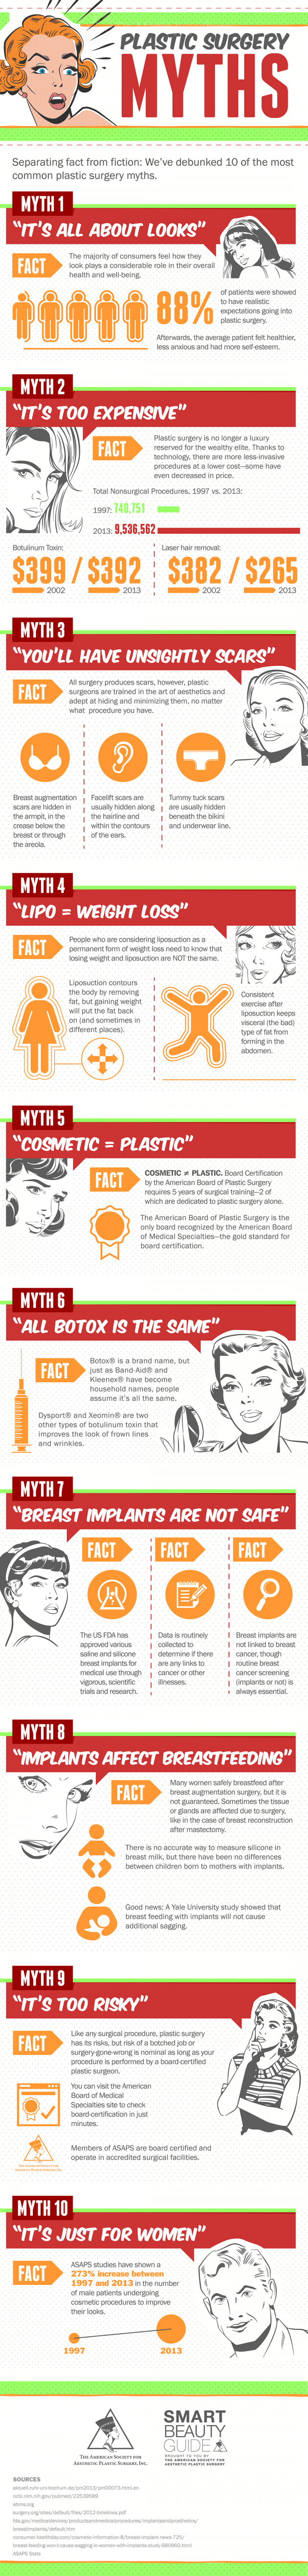 top 10 myths about cosmetic plastic surgery